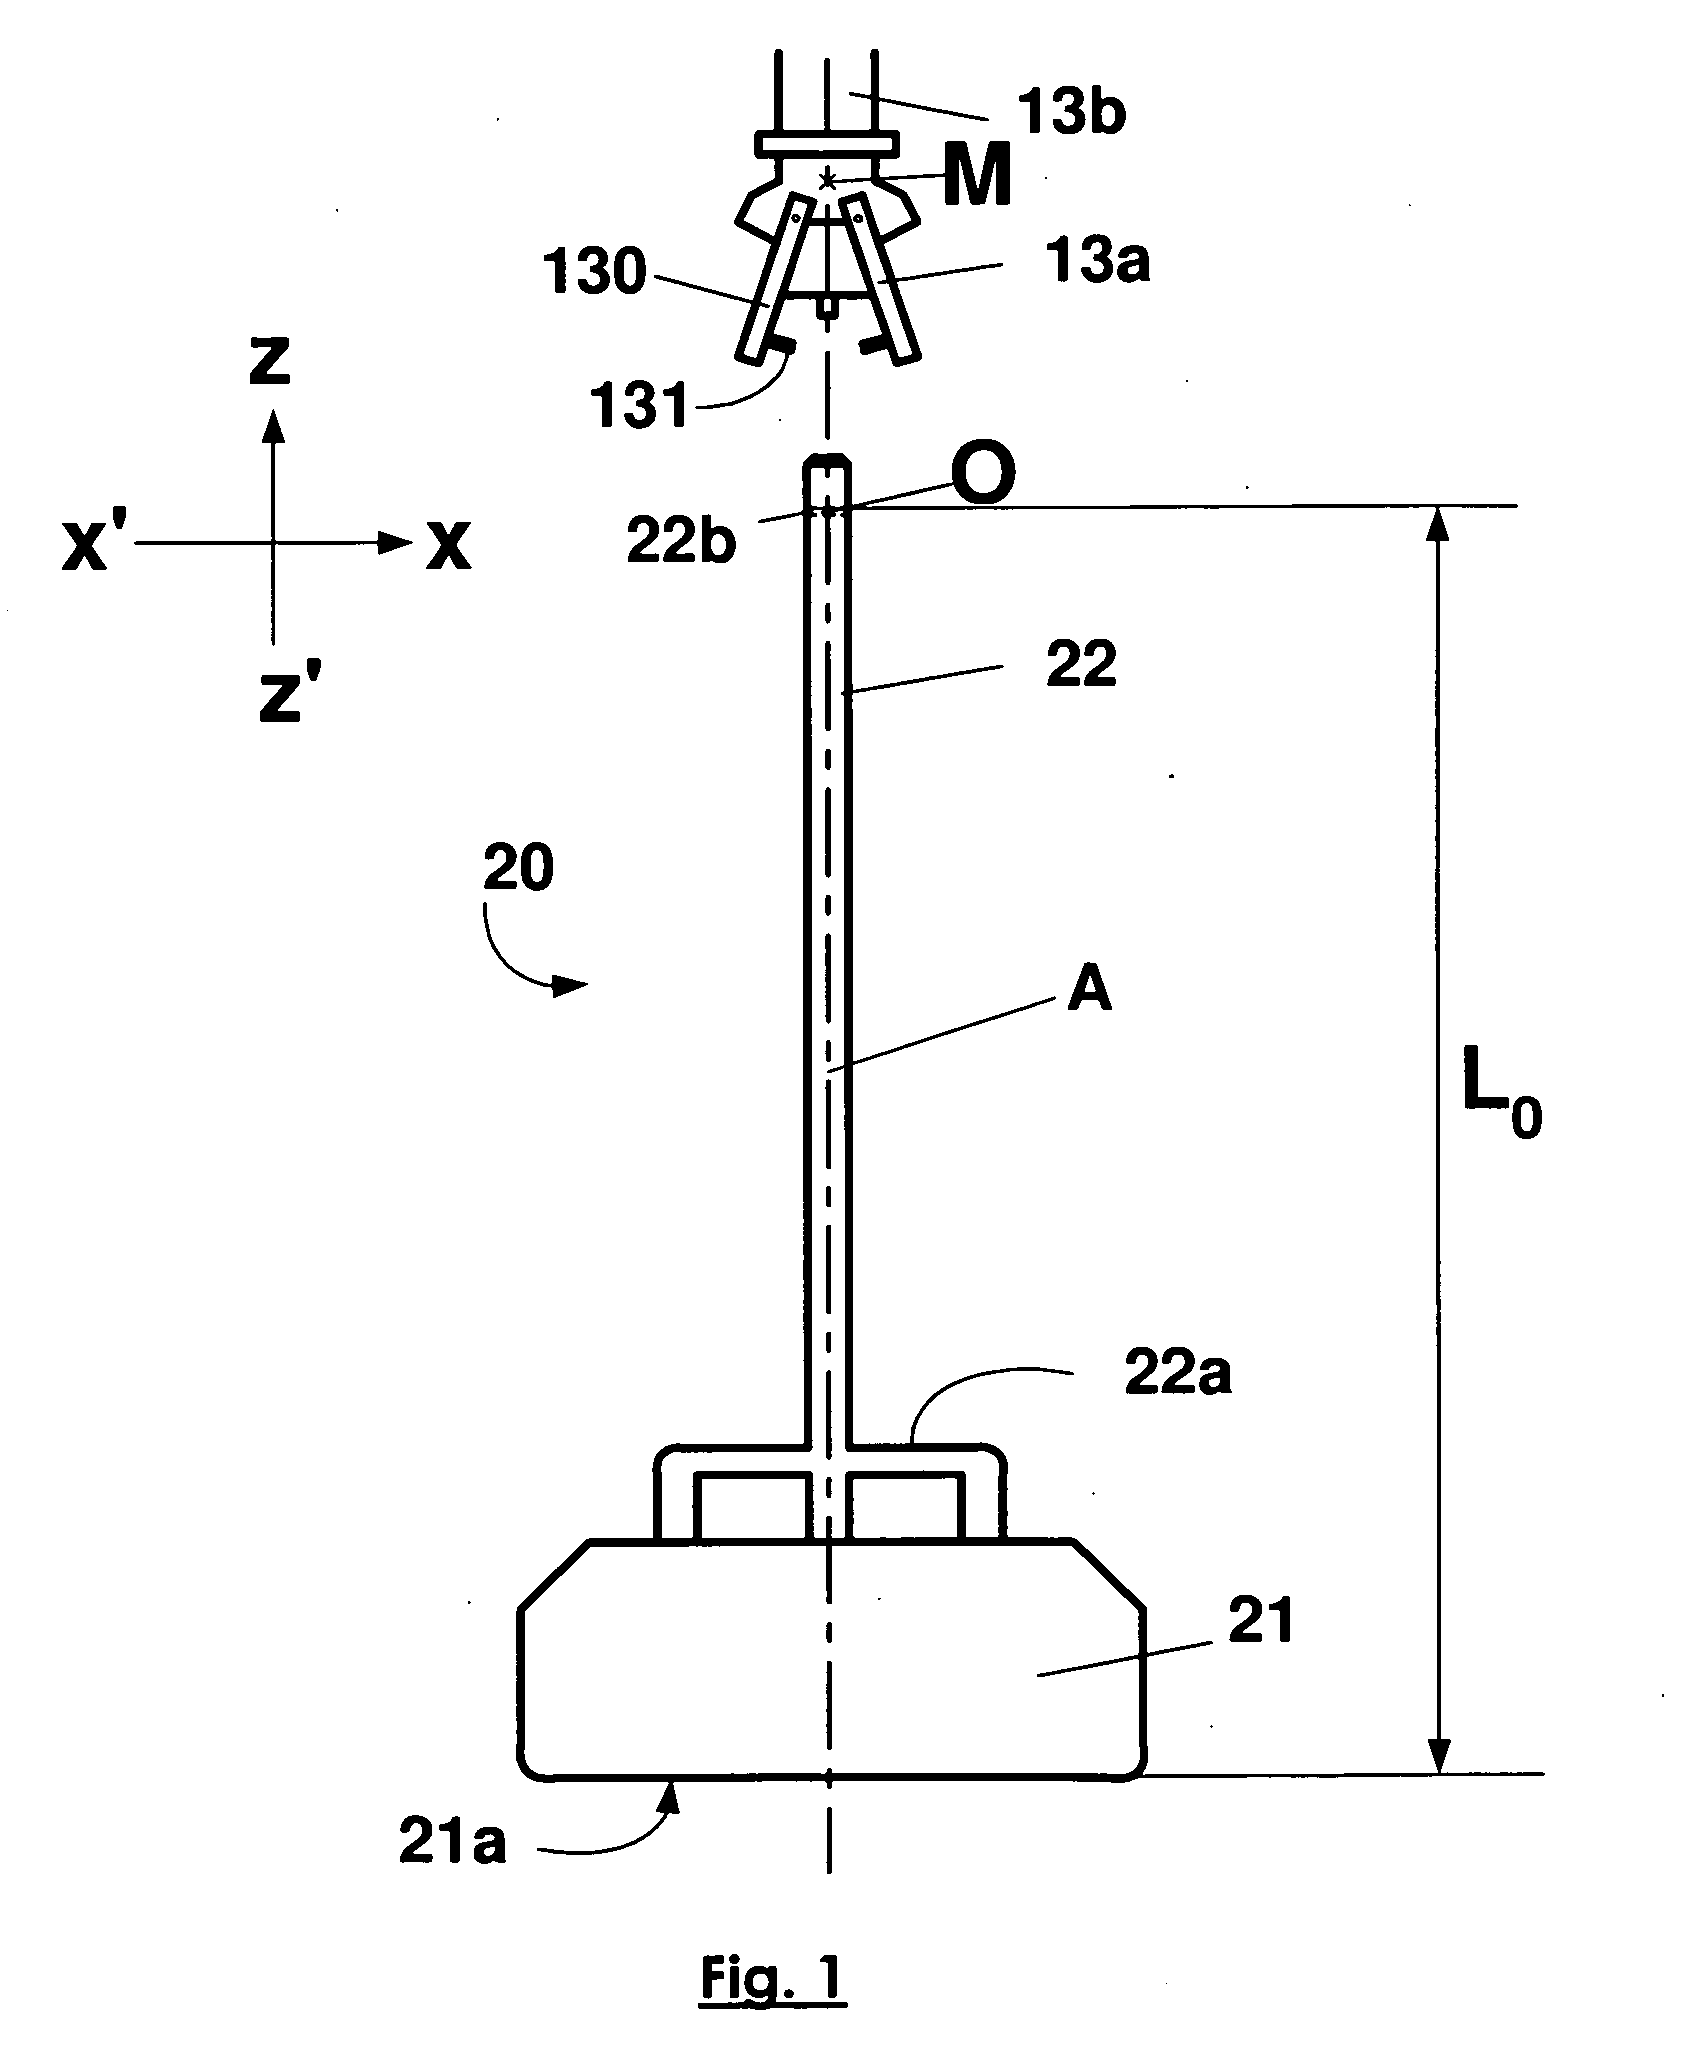 Method of measuring, on the fly, the height of an electrolysis anode